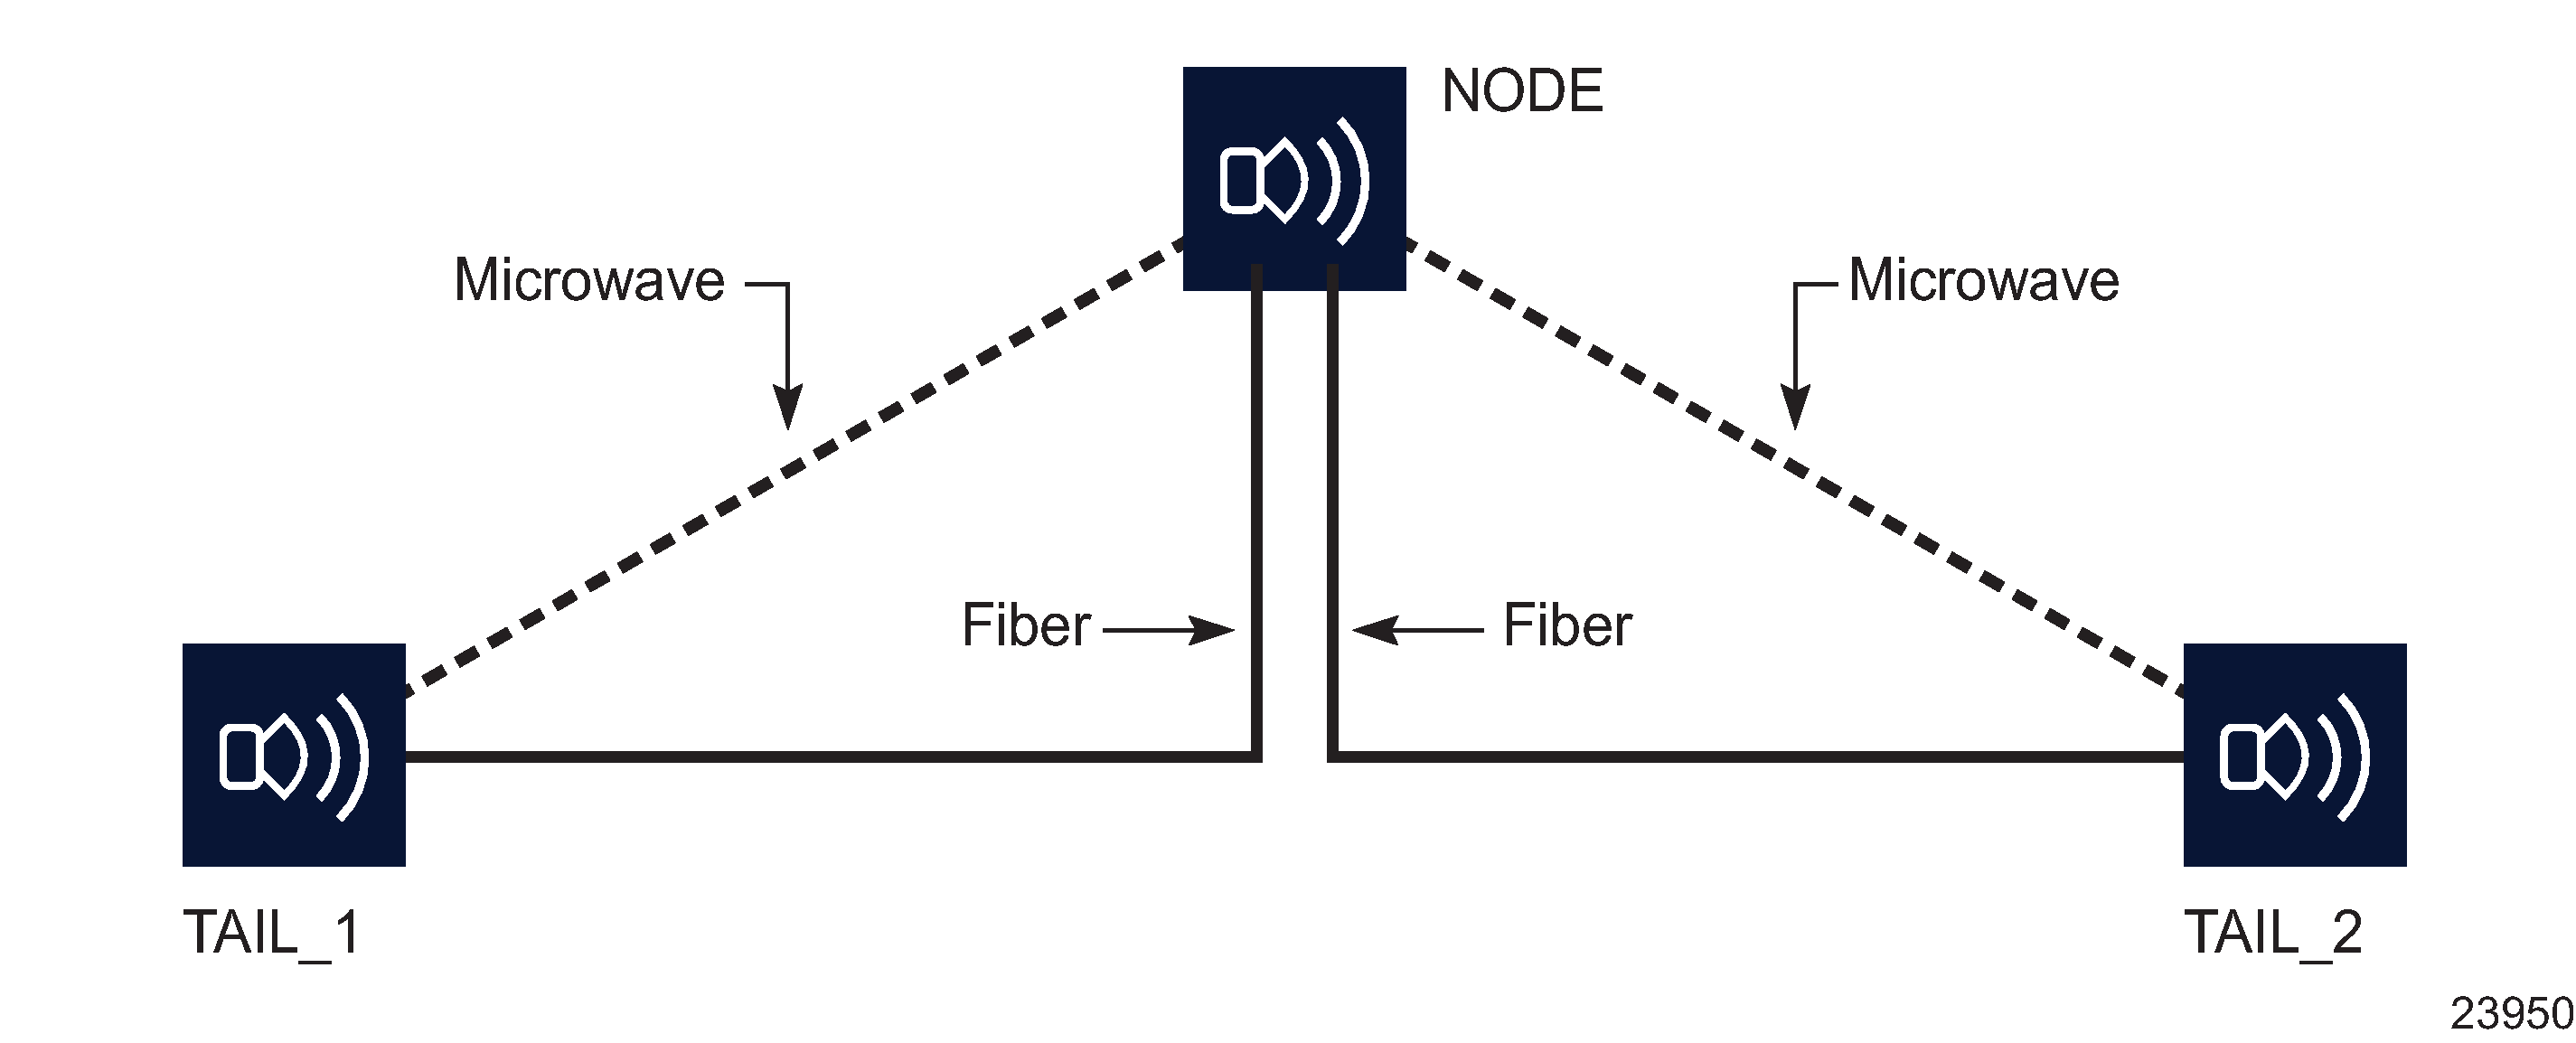 Fiber-microwave protection on tail nodes